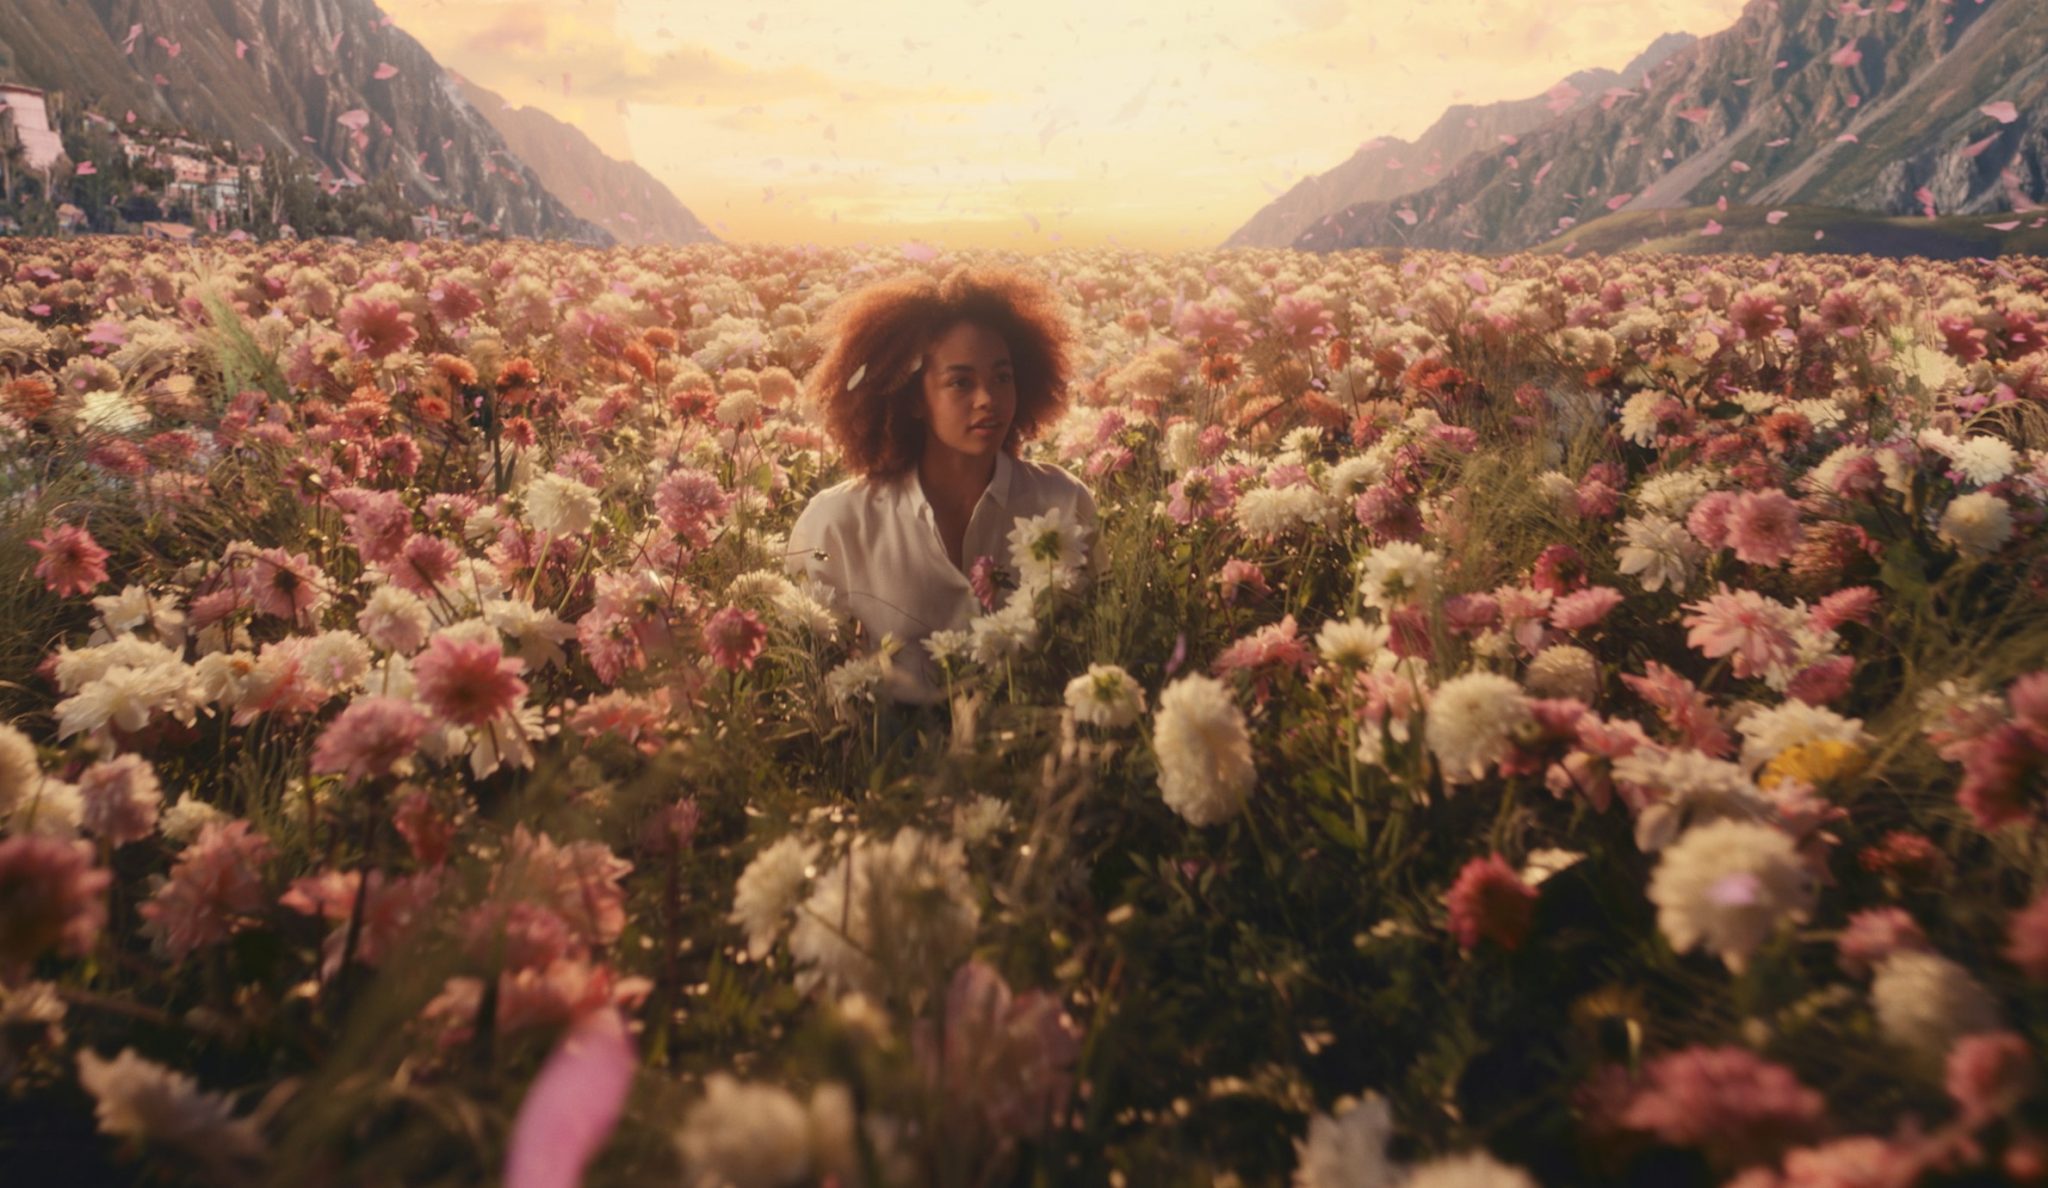 A person sitting in a field of pink and white flowers